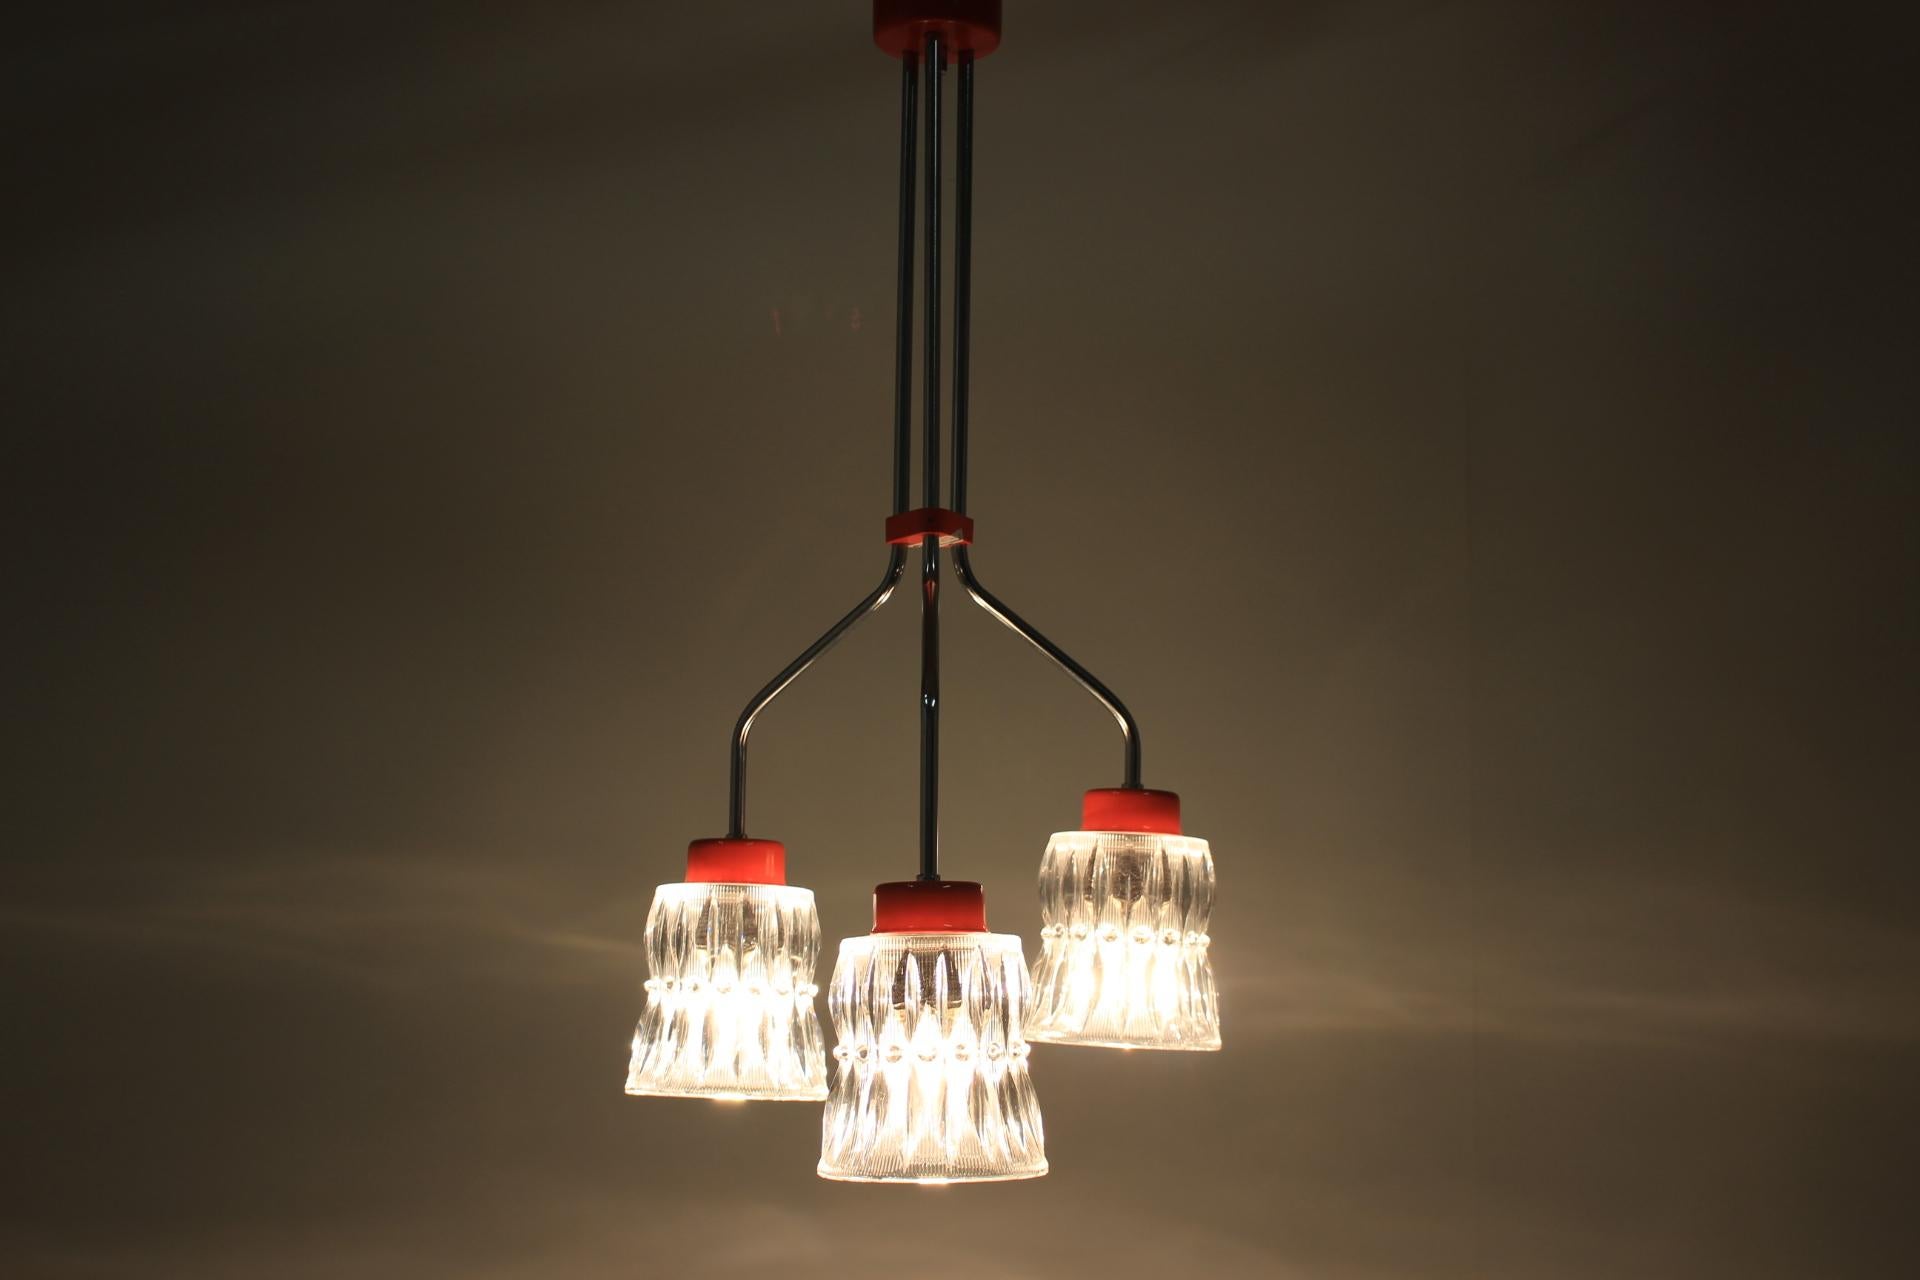 - Made of cut glass, metal
- Metal parts are polished
- Made in Czechoslovakia
- Original, fully functional condition
- Dimension of lampshades is 13 x 12 cm.